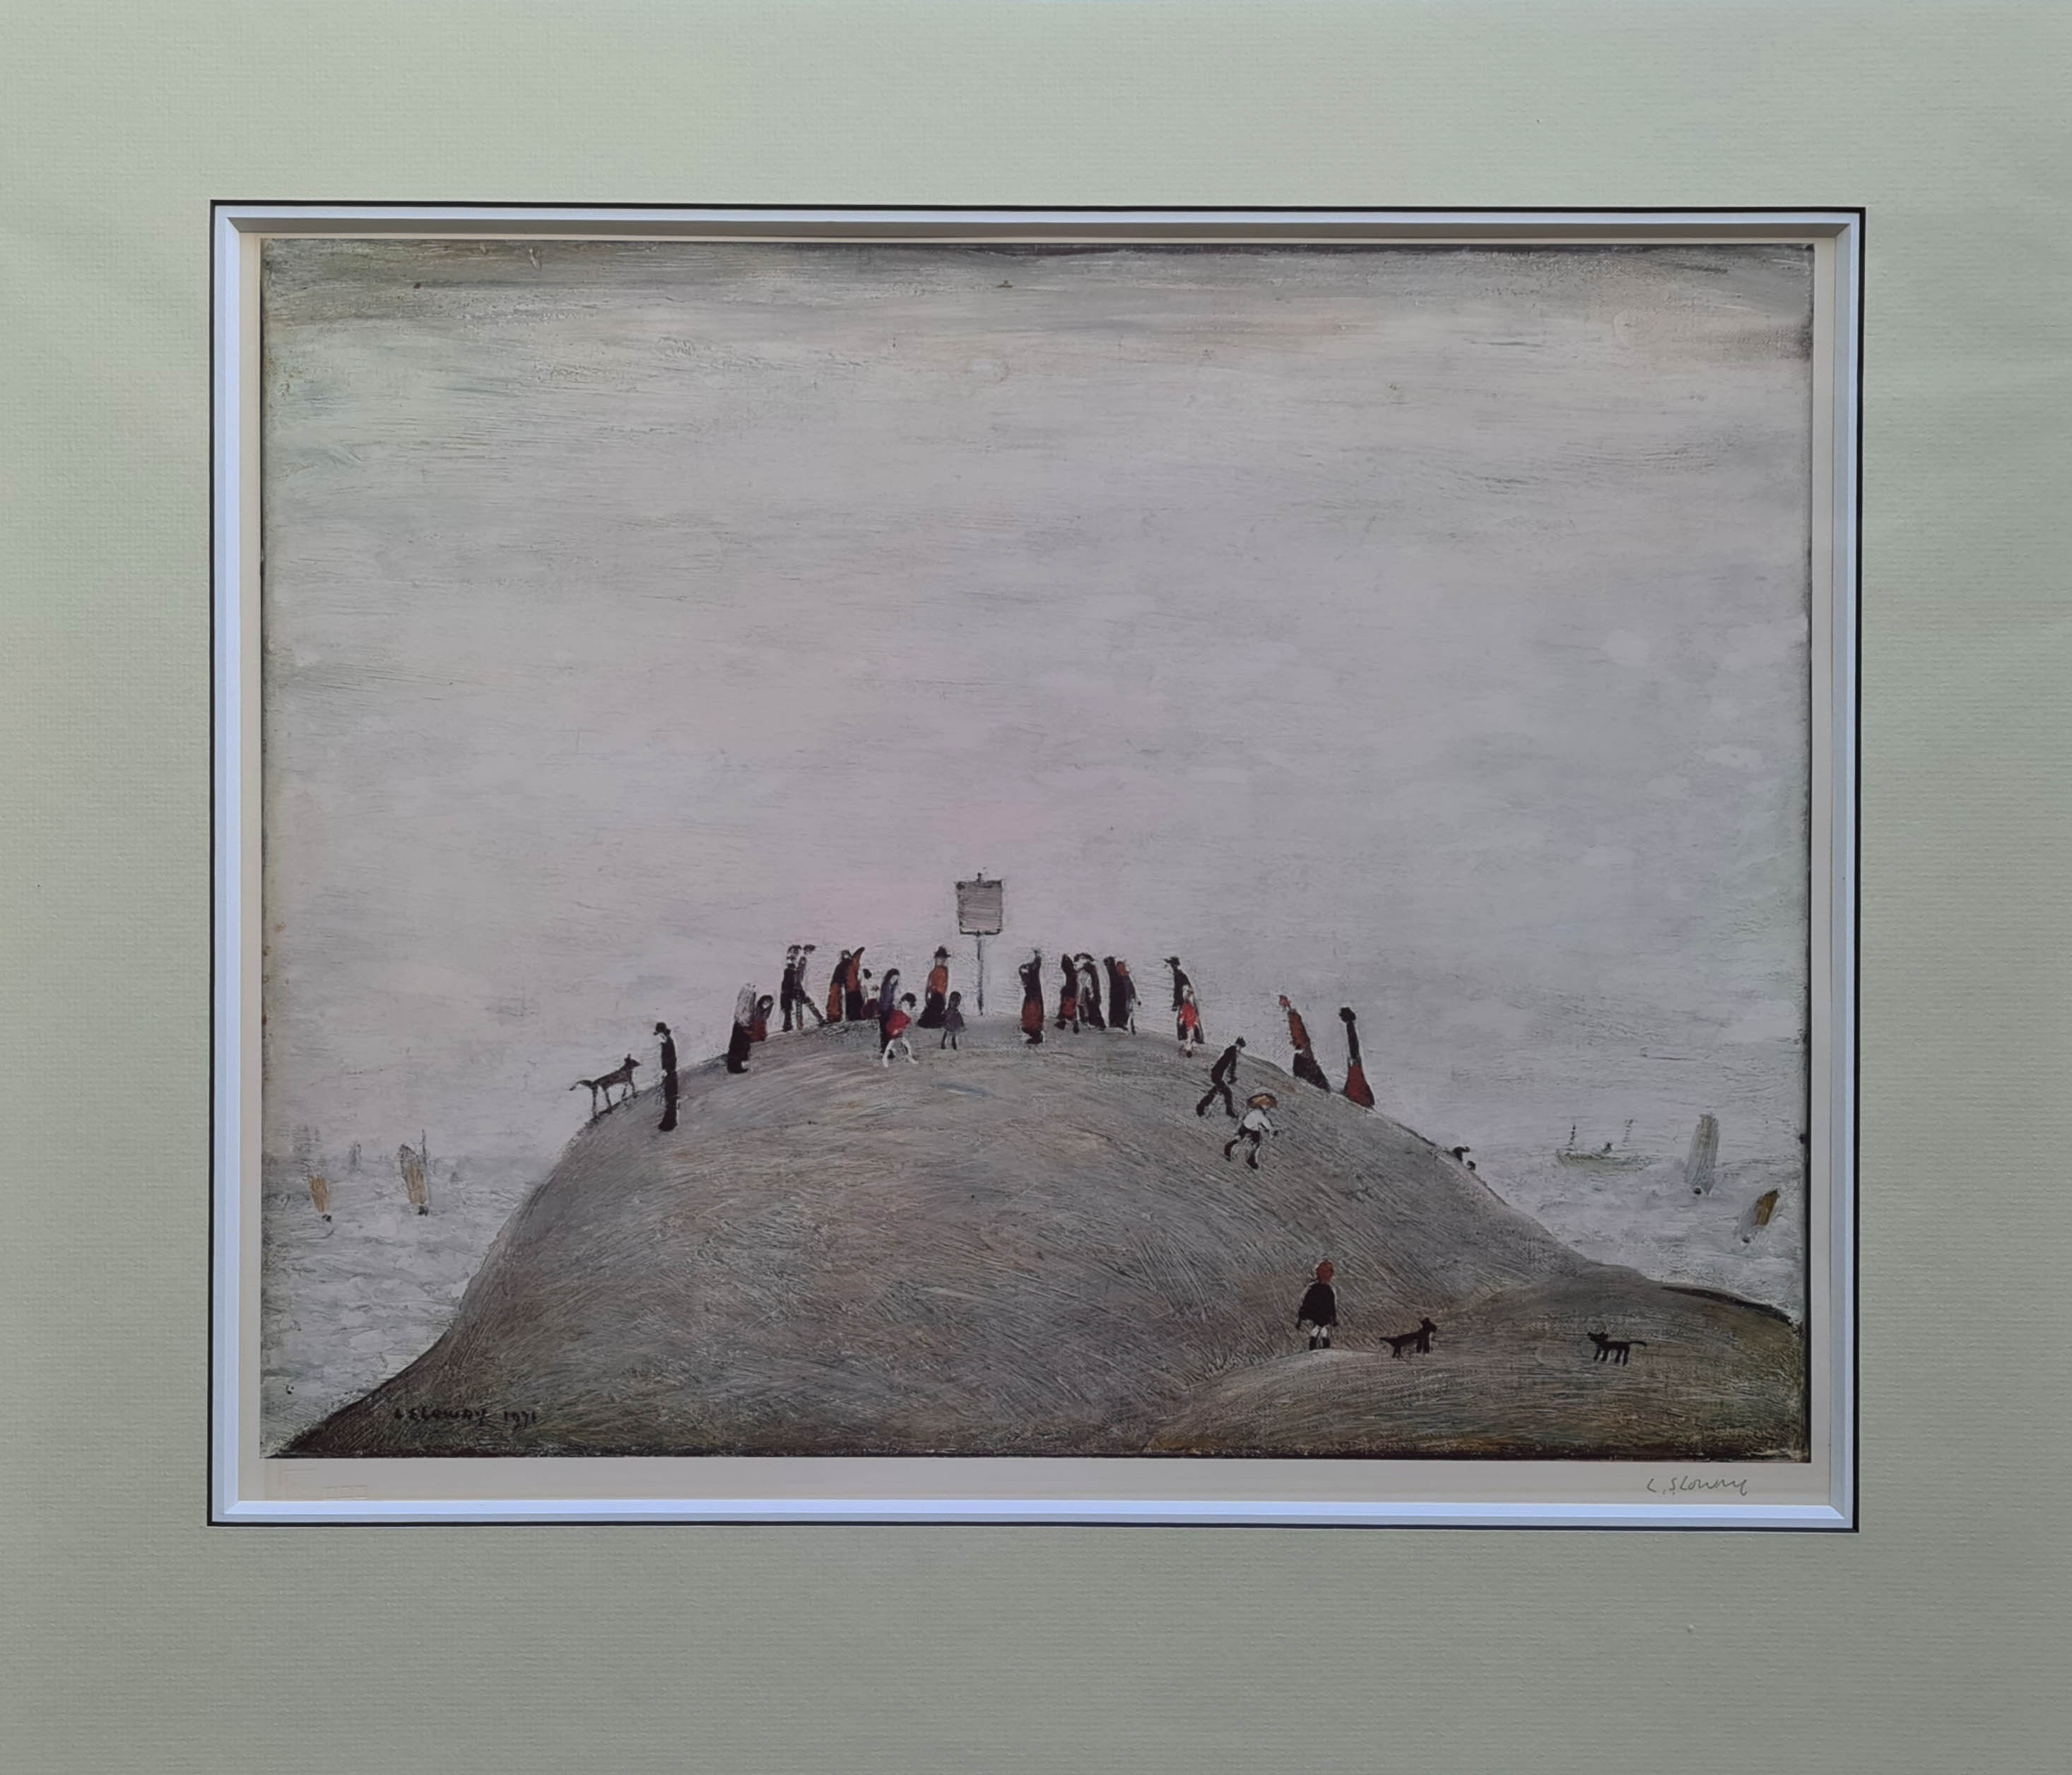 lowry, the noticeboard, signed print lslowry